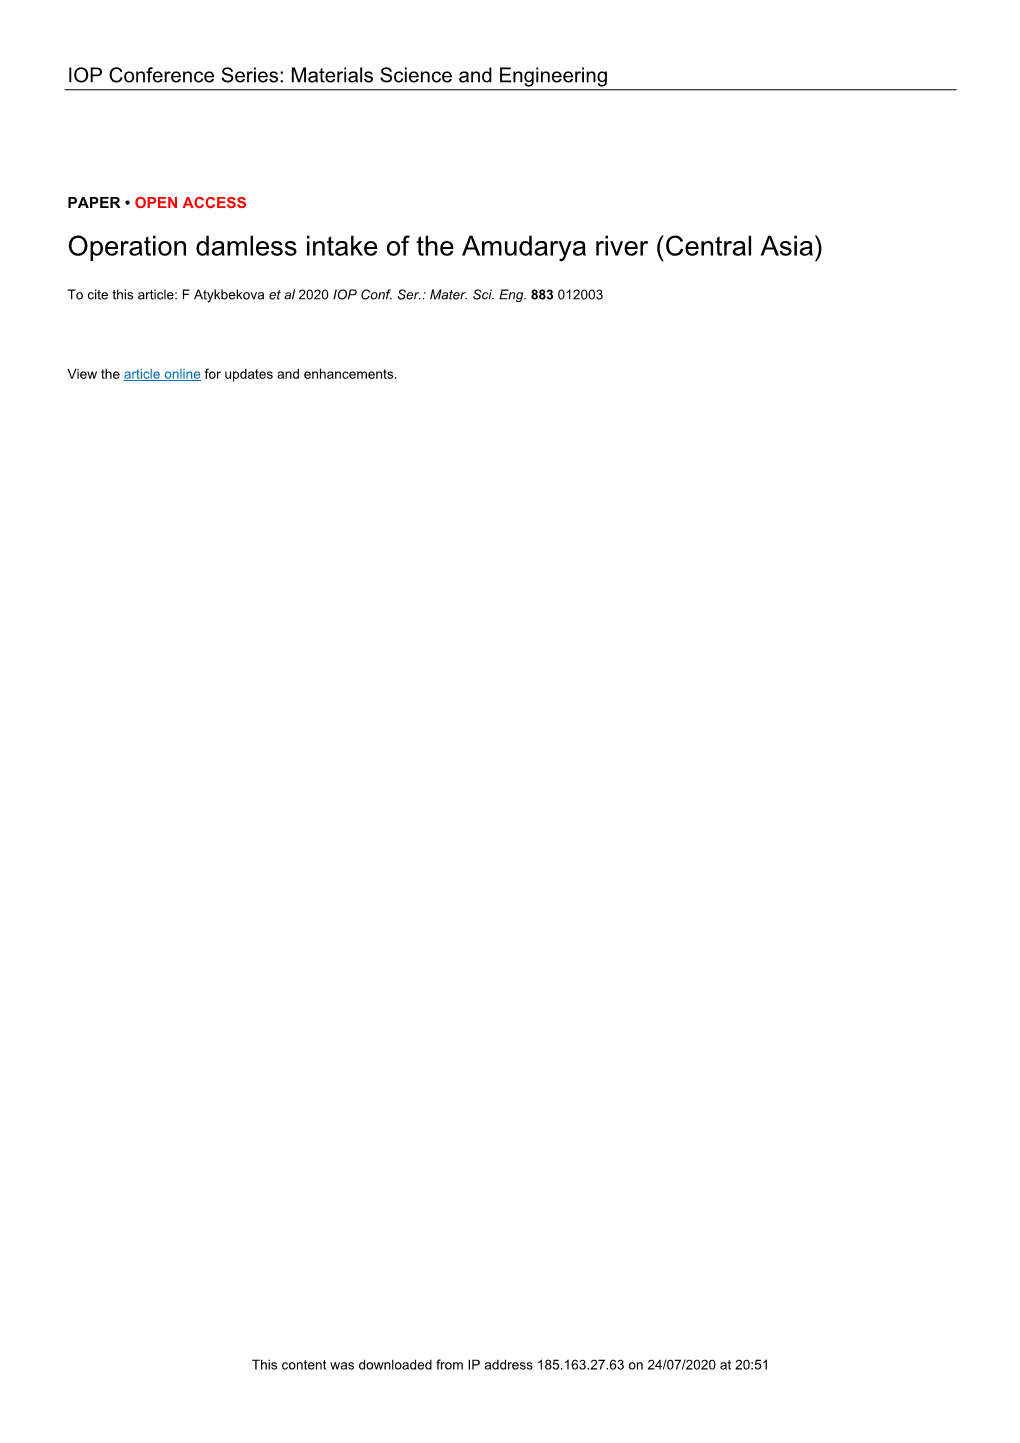 Operation Damless Intake of the Amudarya River (Central Asia)